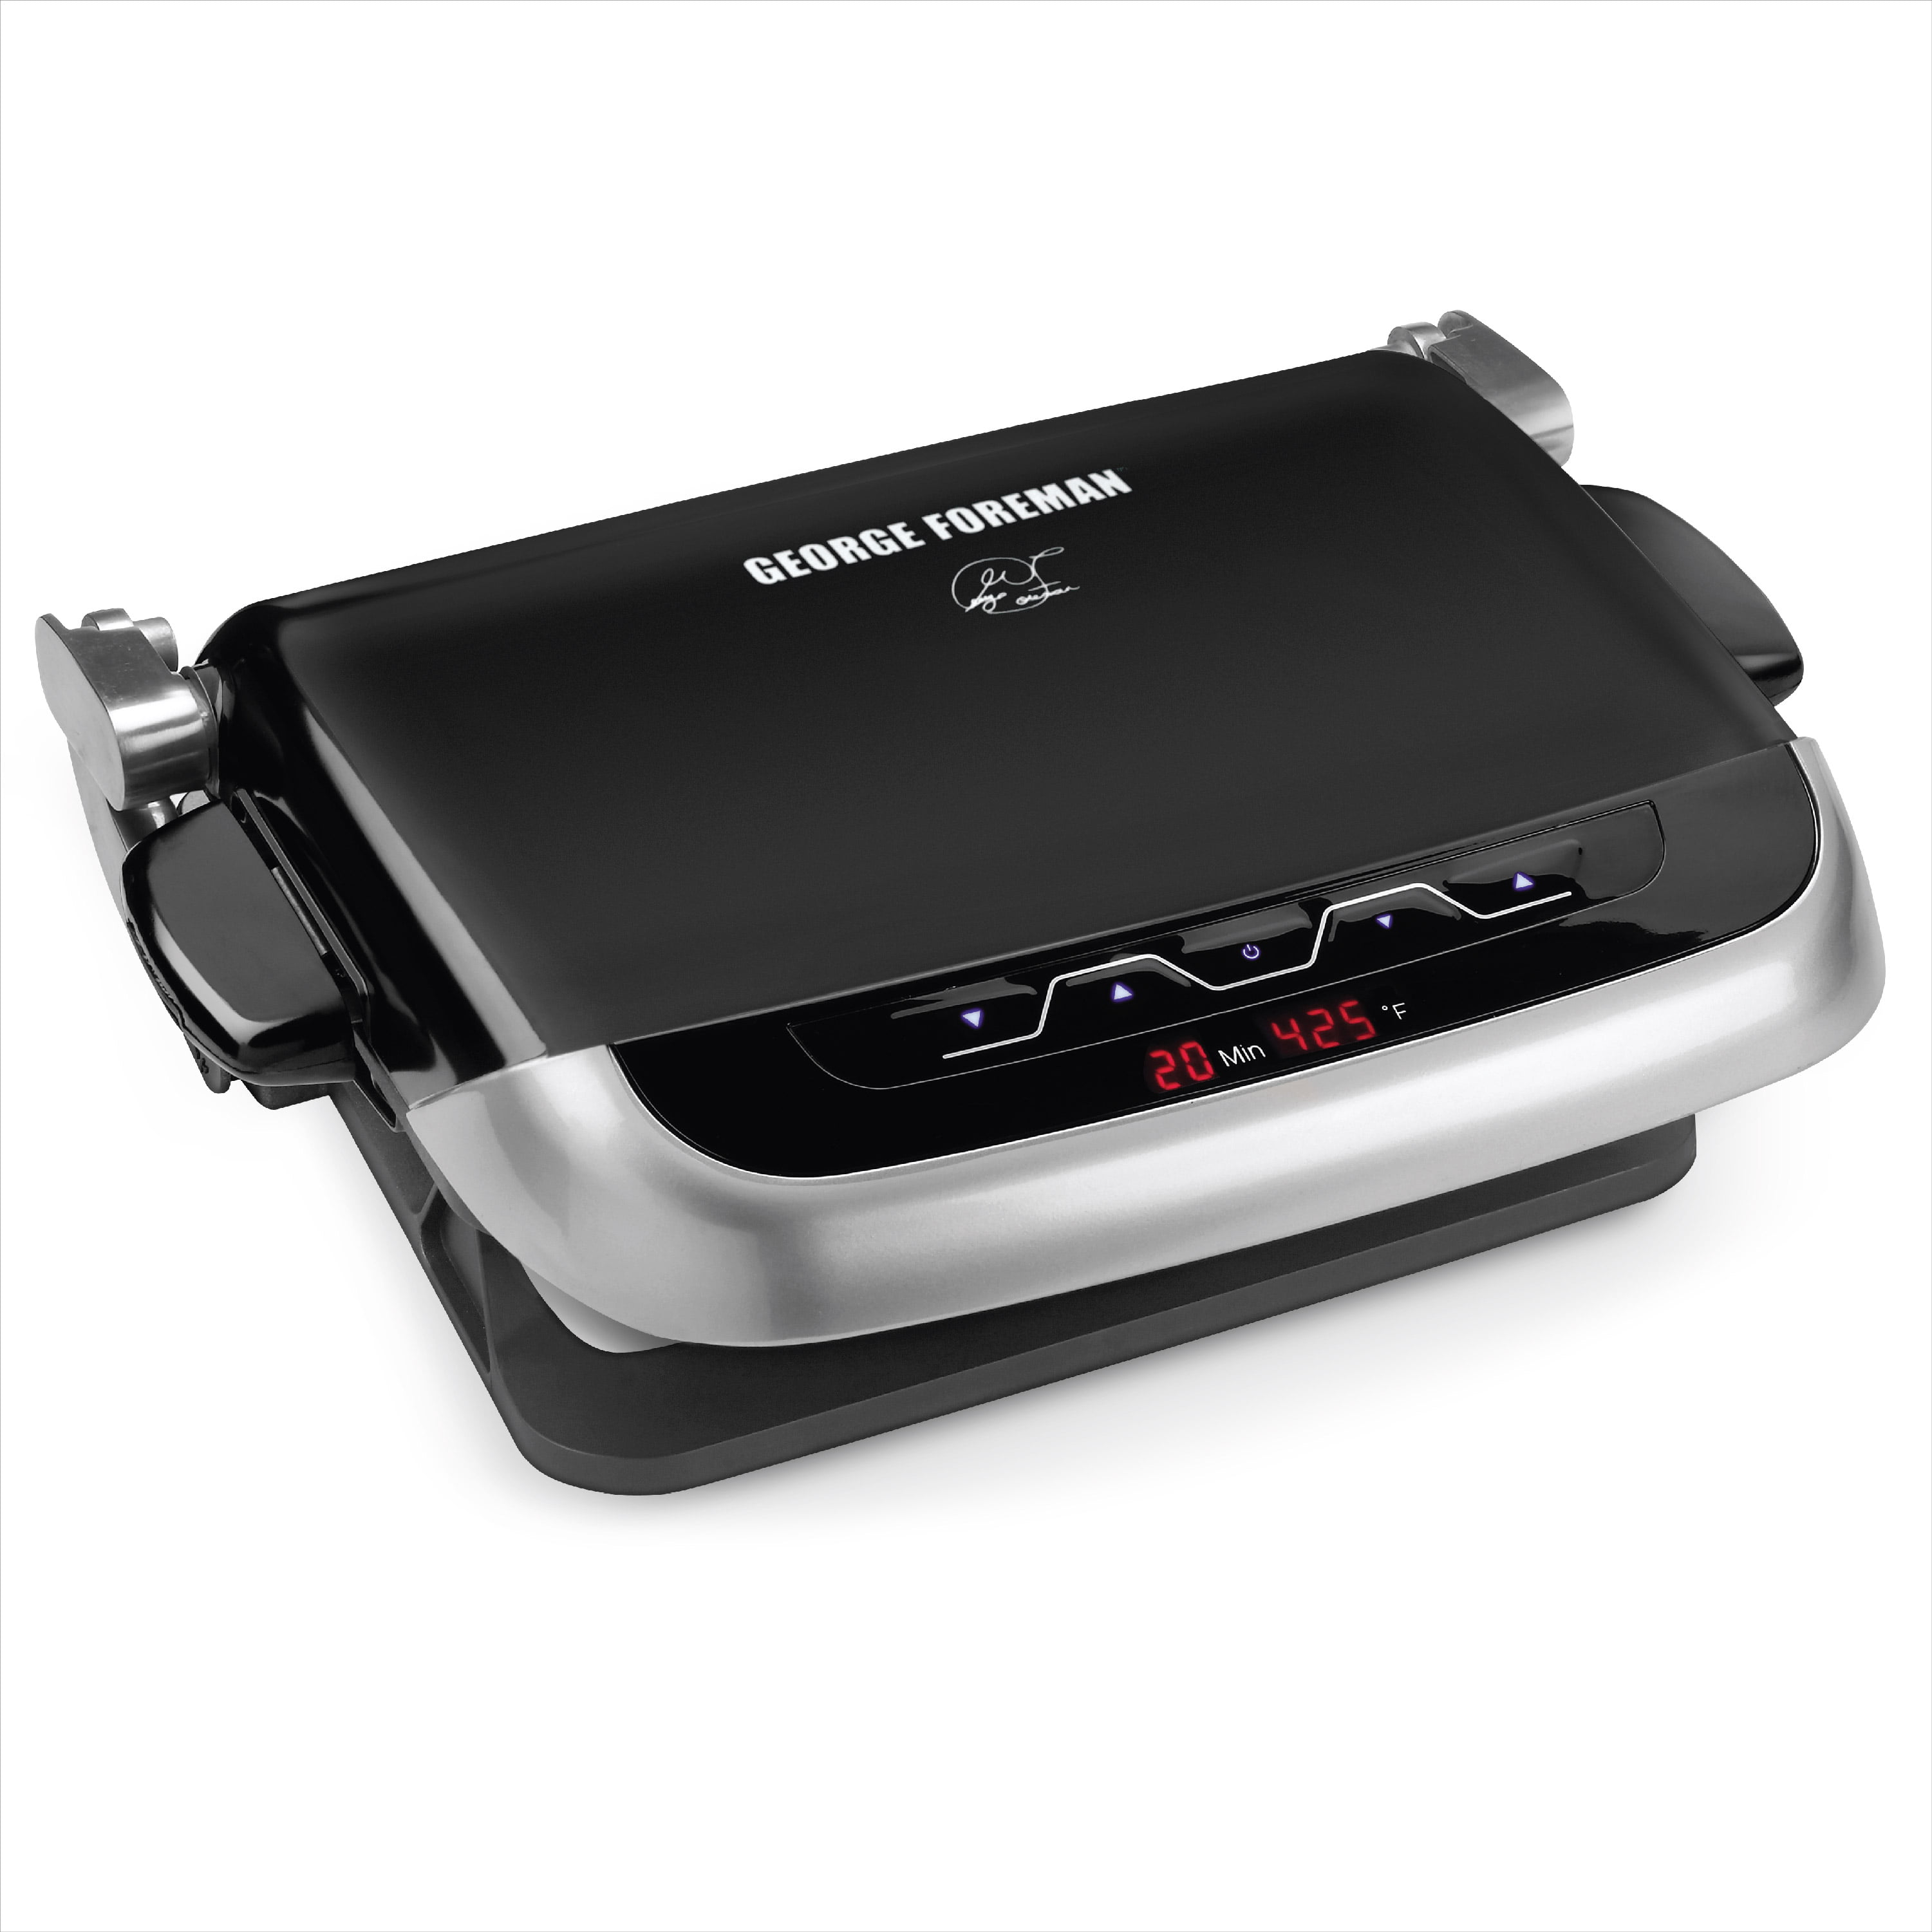 Review: George Foreman Still Makes the Best Electric Grill - InsideHook